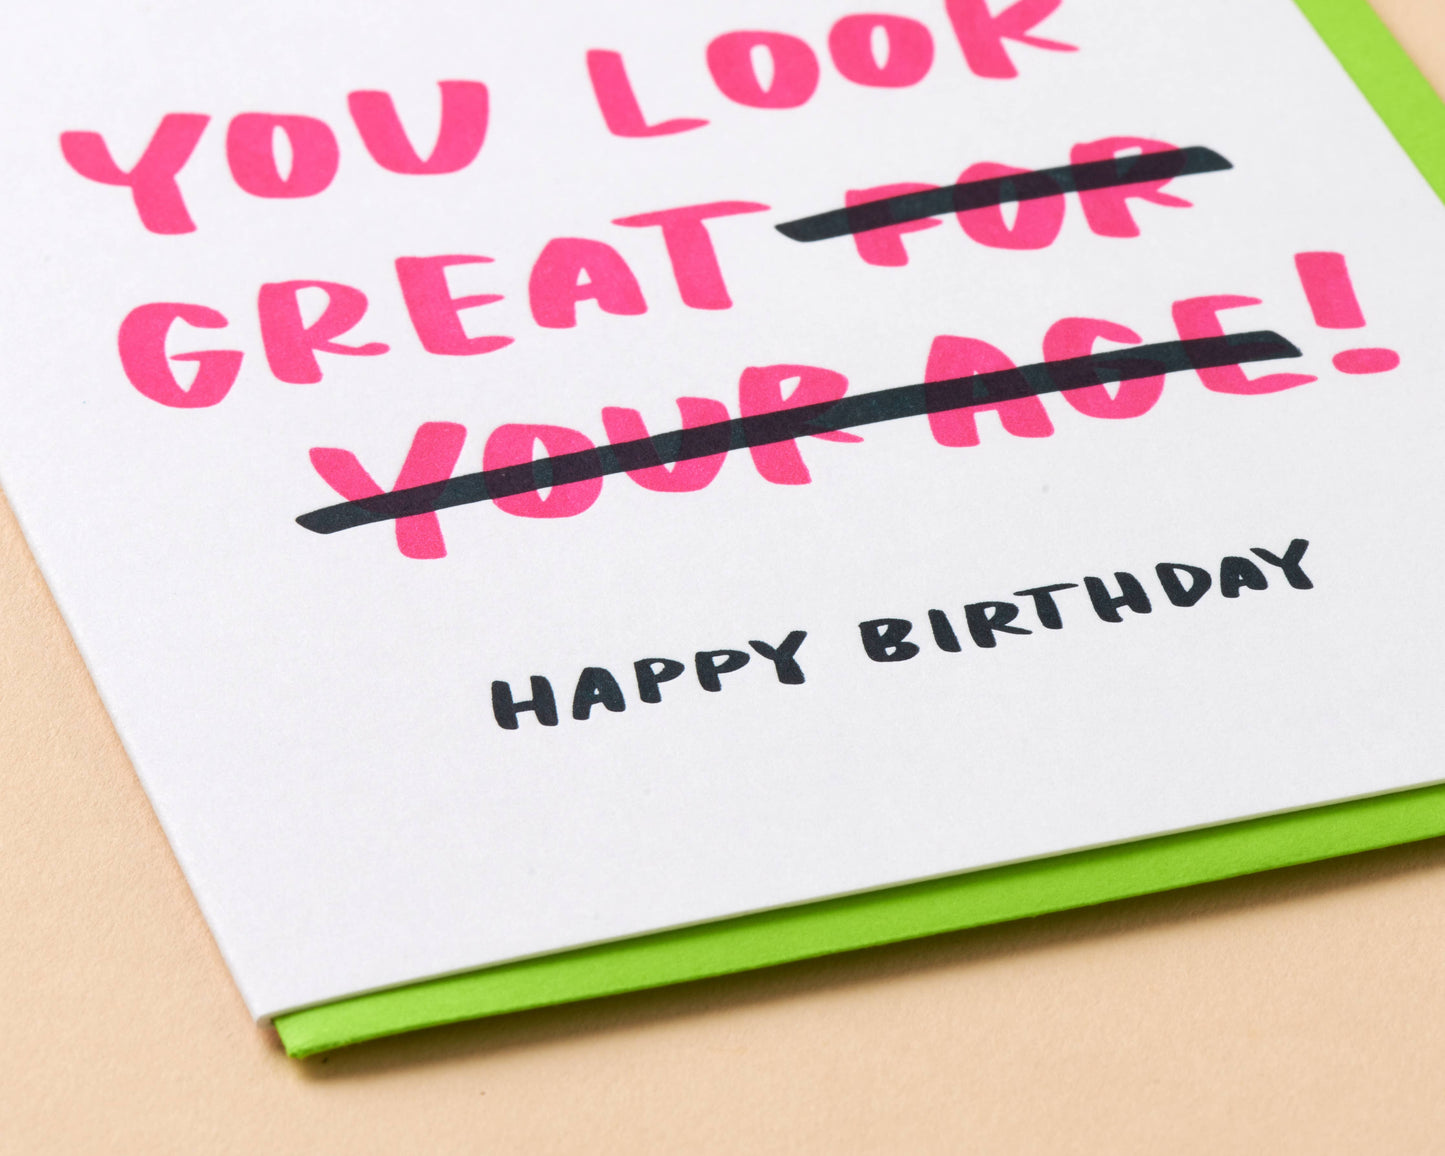 And Here We Are - You Look Great Happy Birthday Letterpress Greeting Card